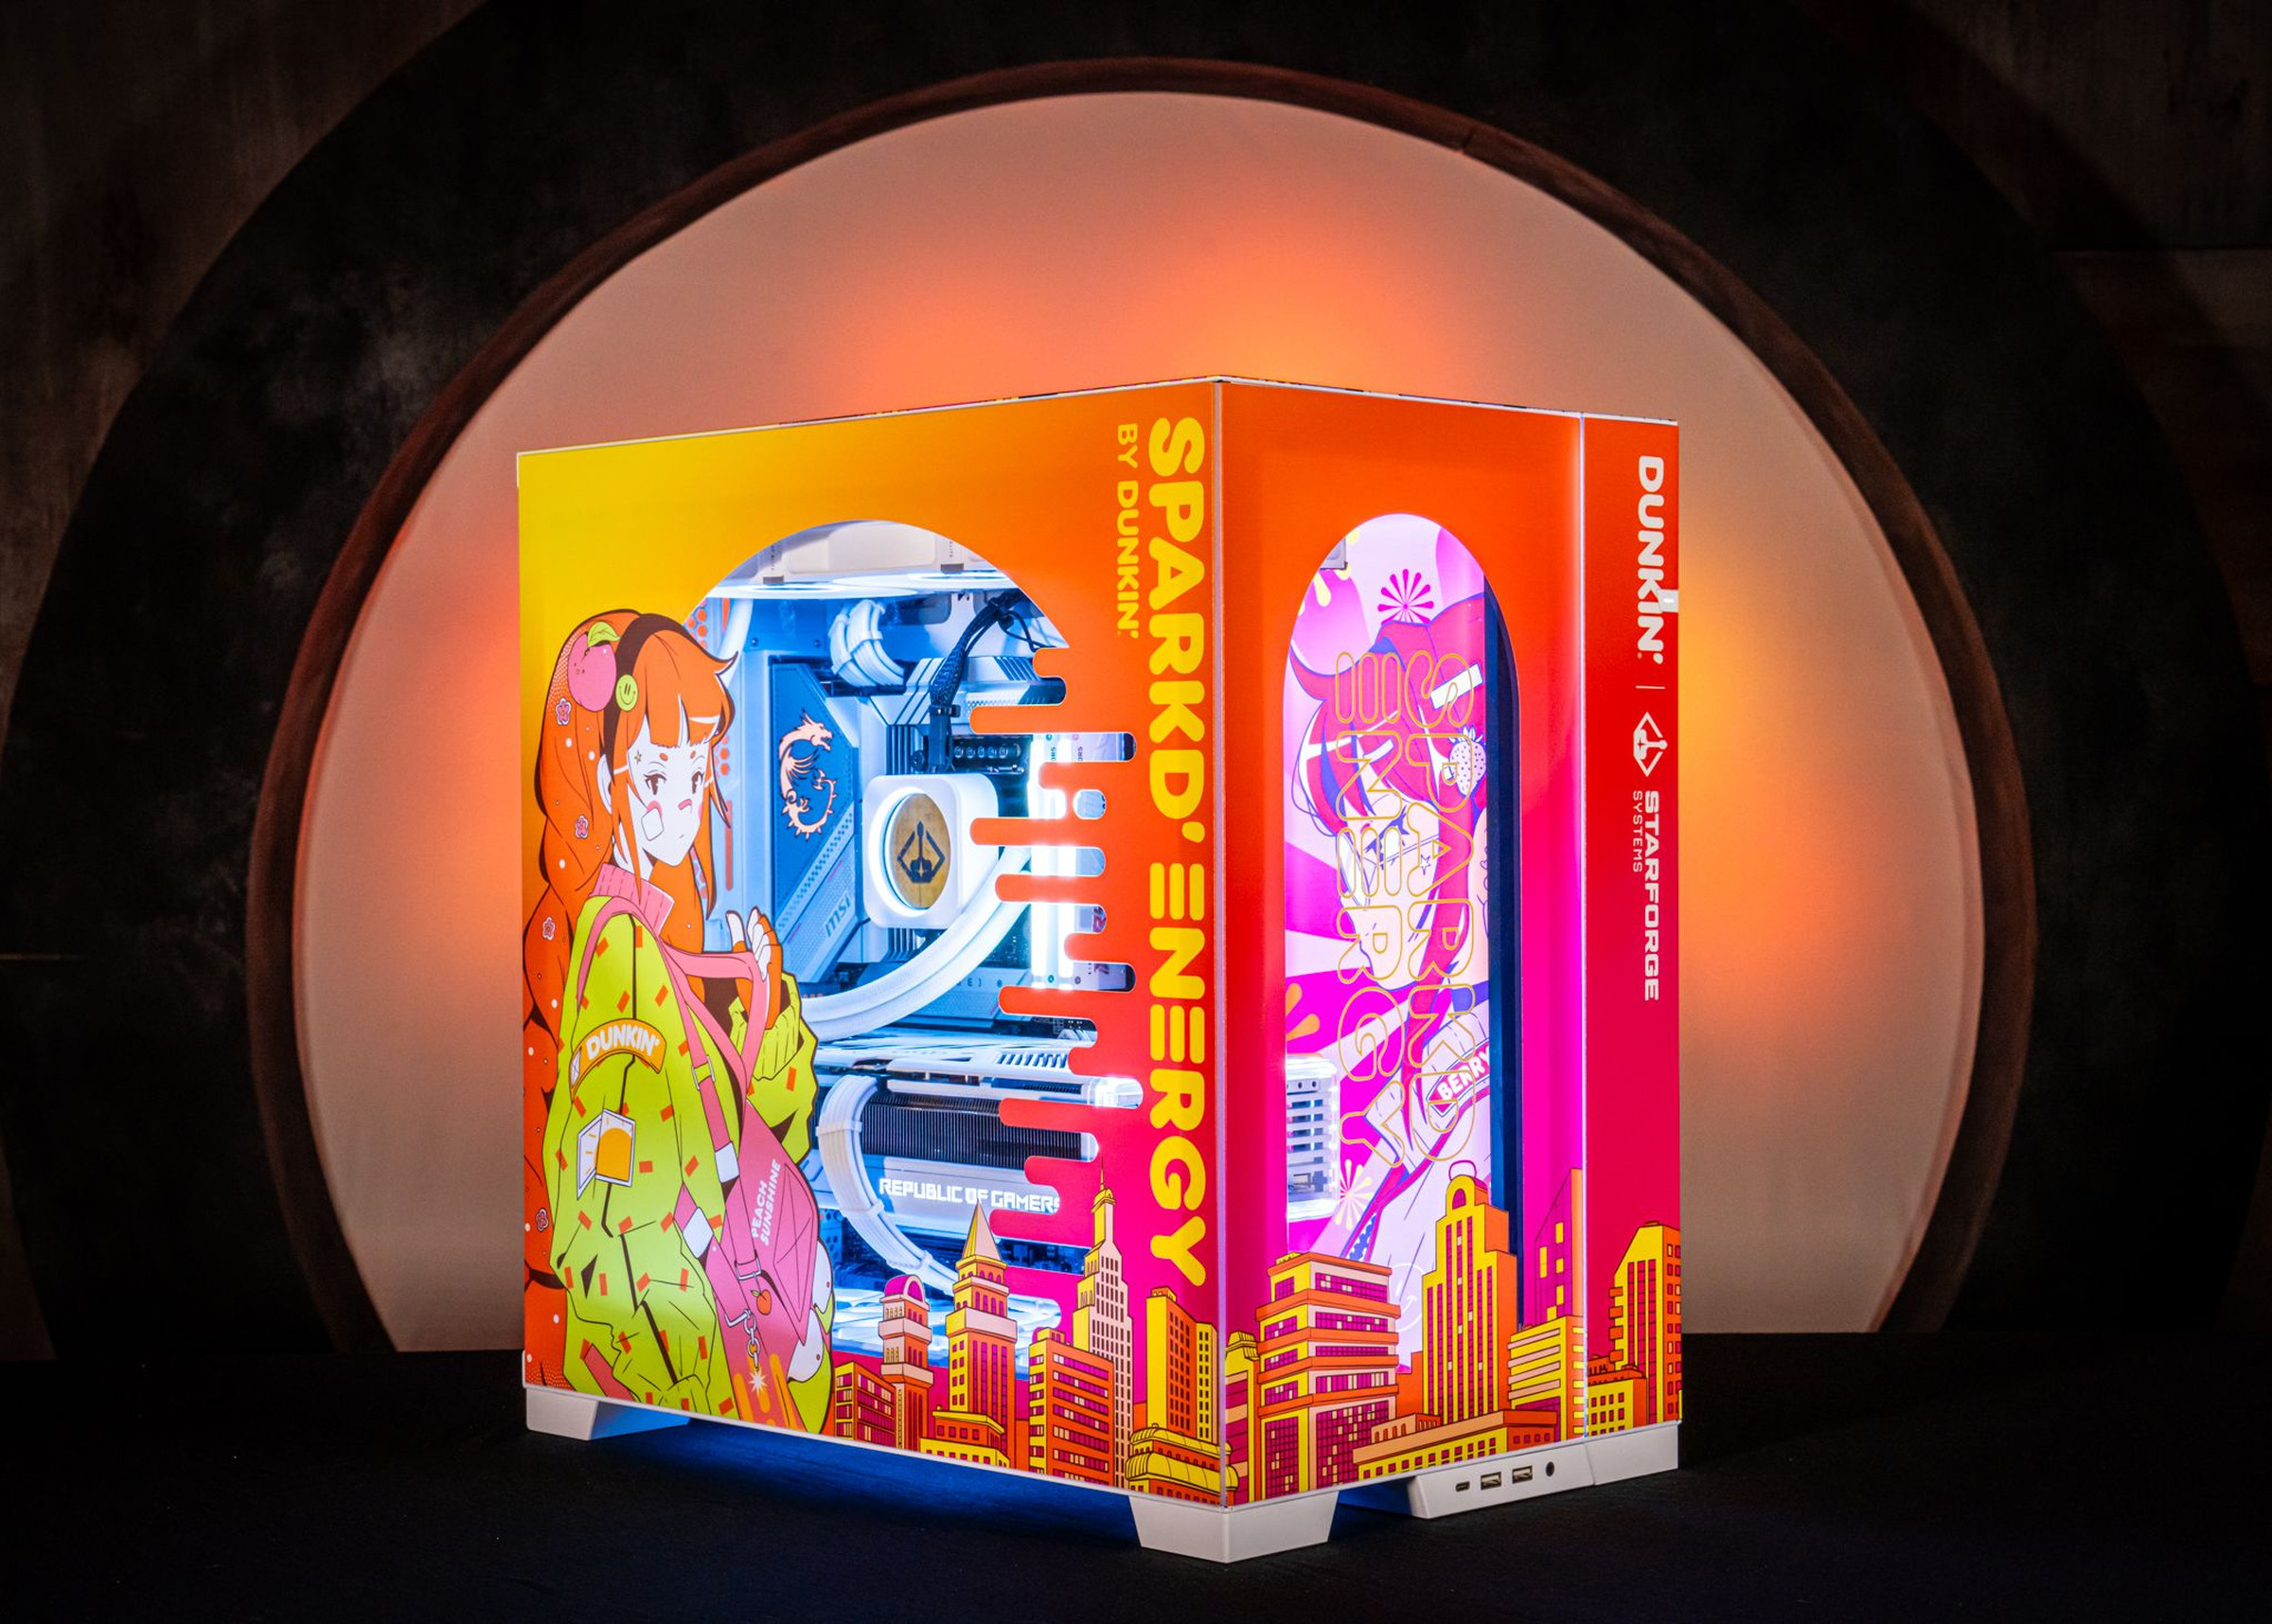 The Dunkin’-themed gaming PC from Starforge systems with a bright pink and yellow color scheme and waifu artwork.